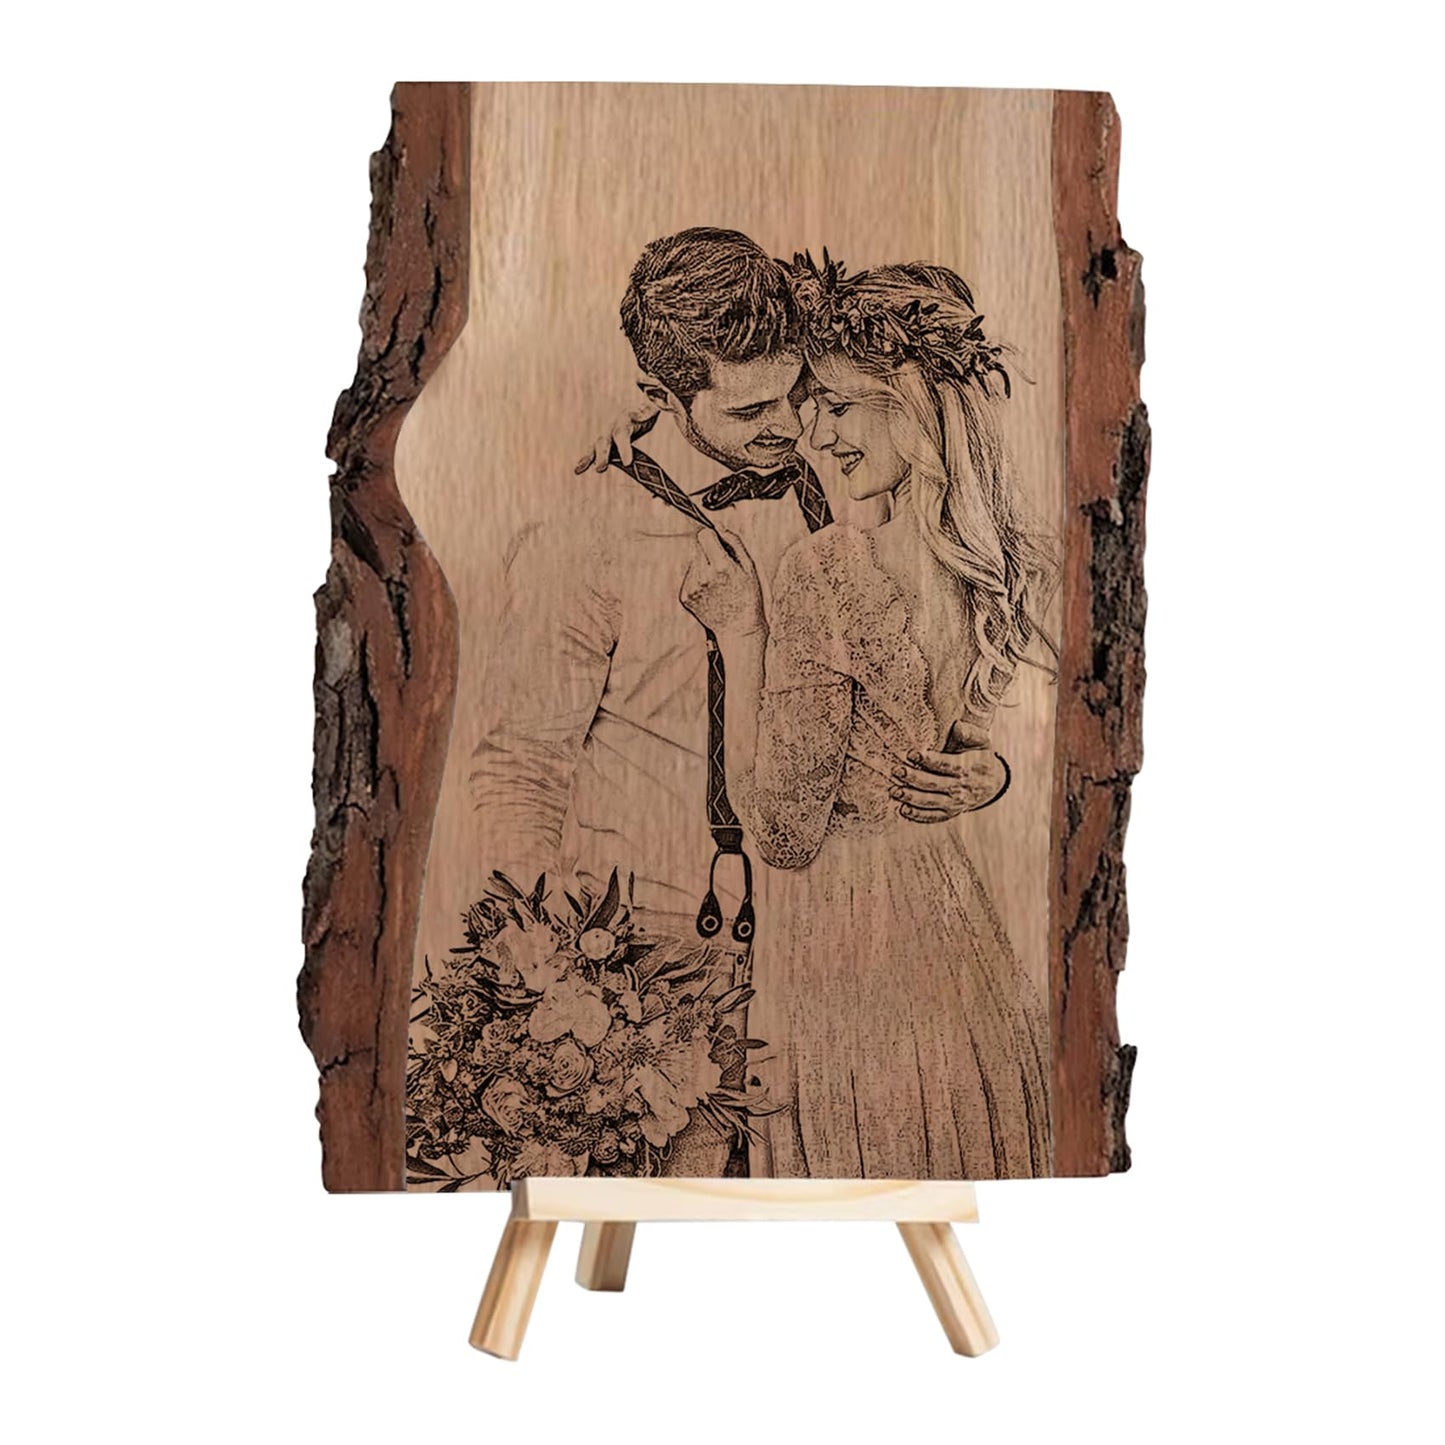 Personalized Photo Wood Slice Custom Engraved Picture Frame Album Wooden Crafts with Bracket Photo Printing on Wood Slices for Christmas Valentine's